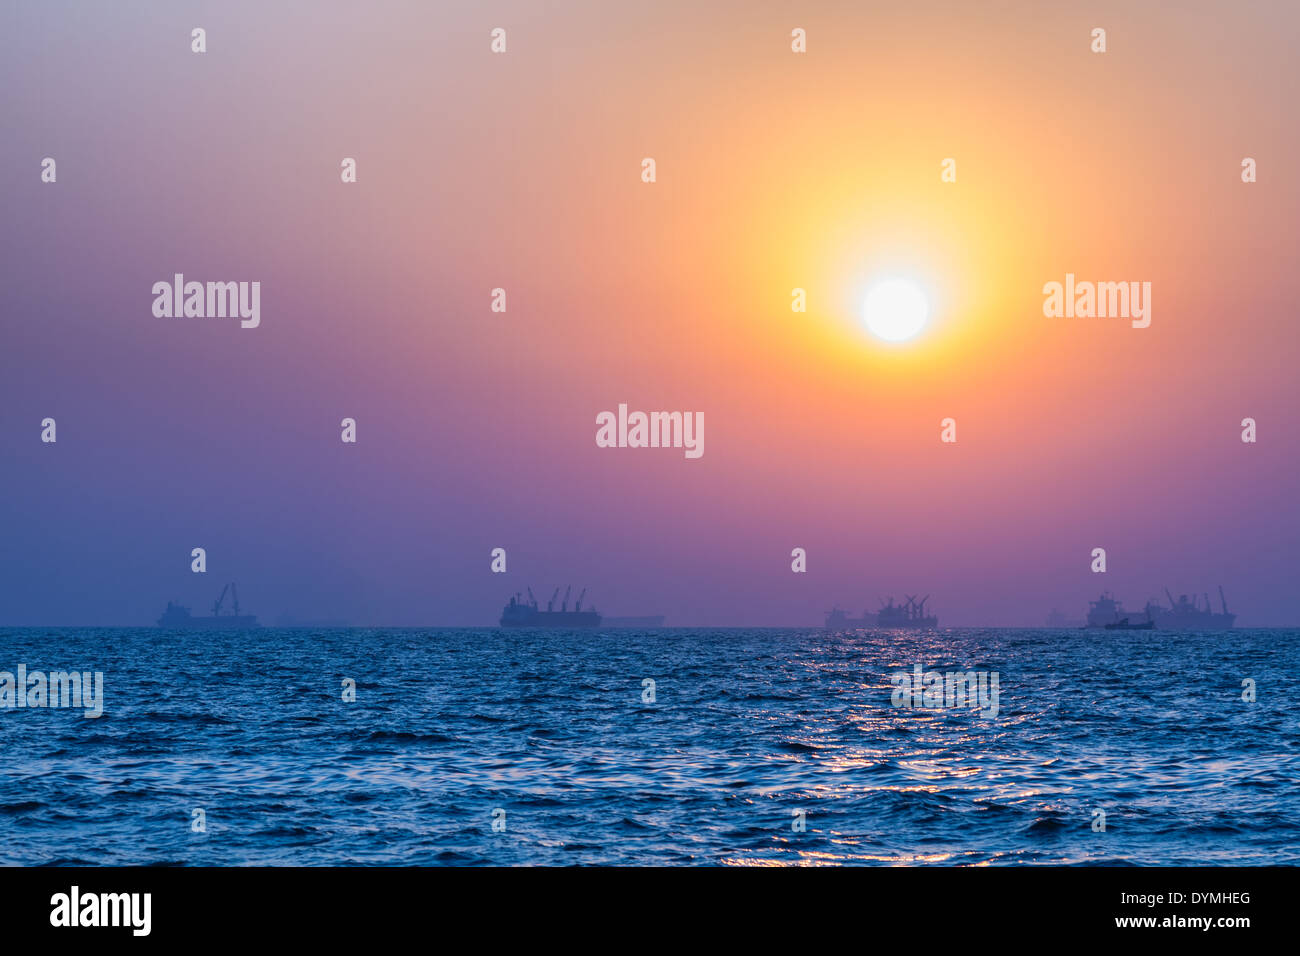 Scenic view of beautiful sunset above the Arabian sea. Cargo ship on the background Stock Photo